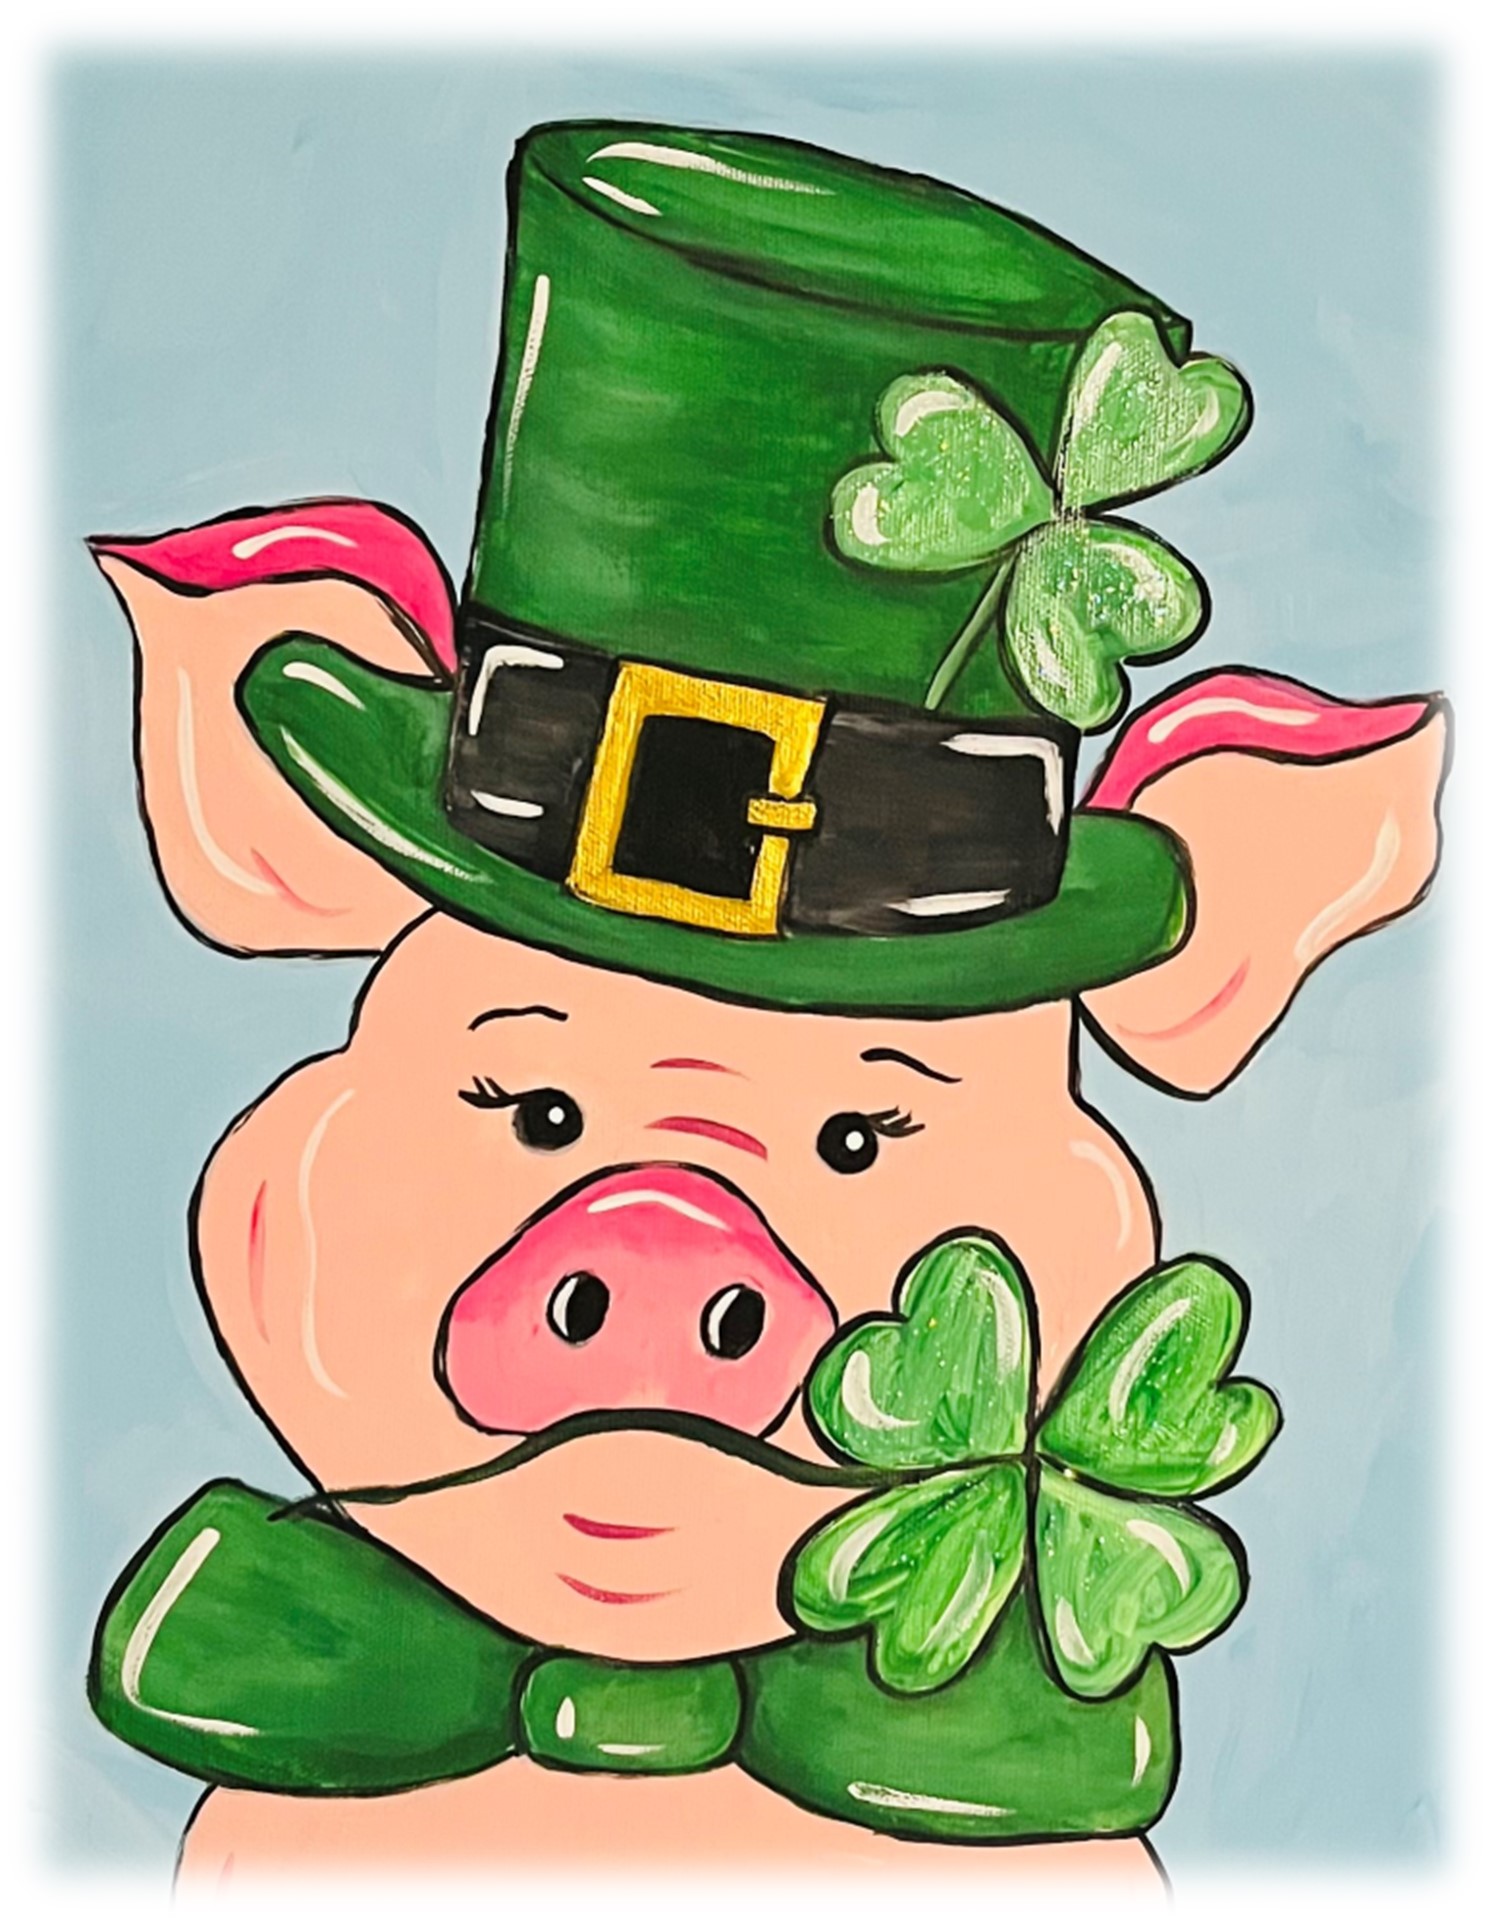 Canvas with a pig painted in acrylics. Pig is wearing a green hat and bow tie. The pig has a shamrock tucked in his hat band and one clenched in his mouth.